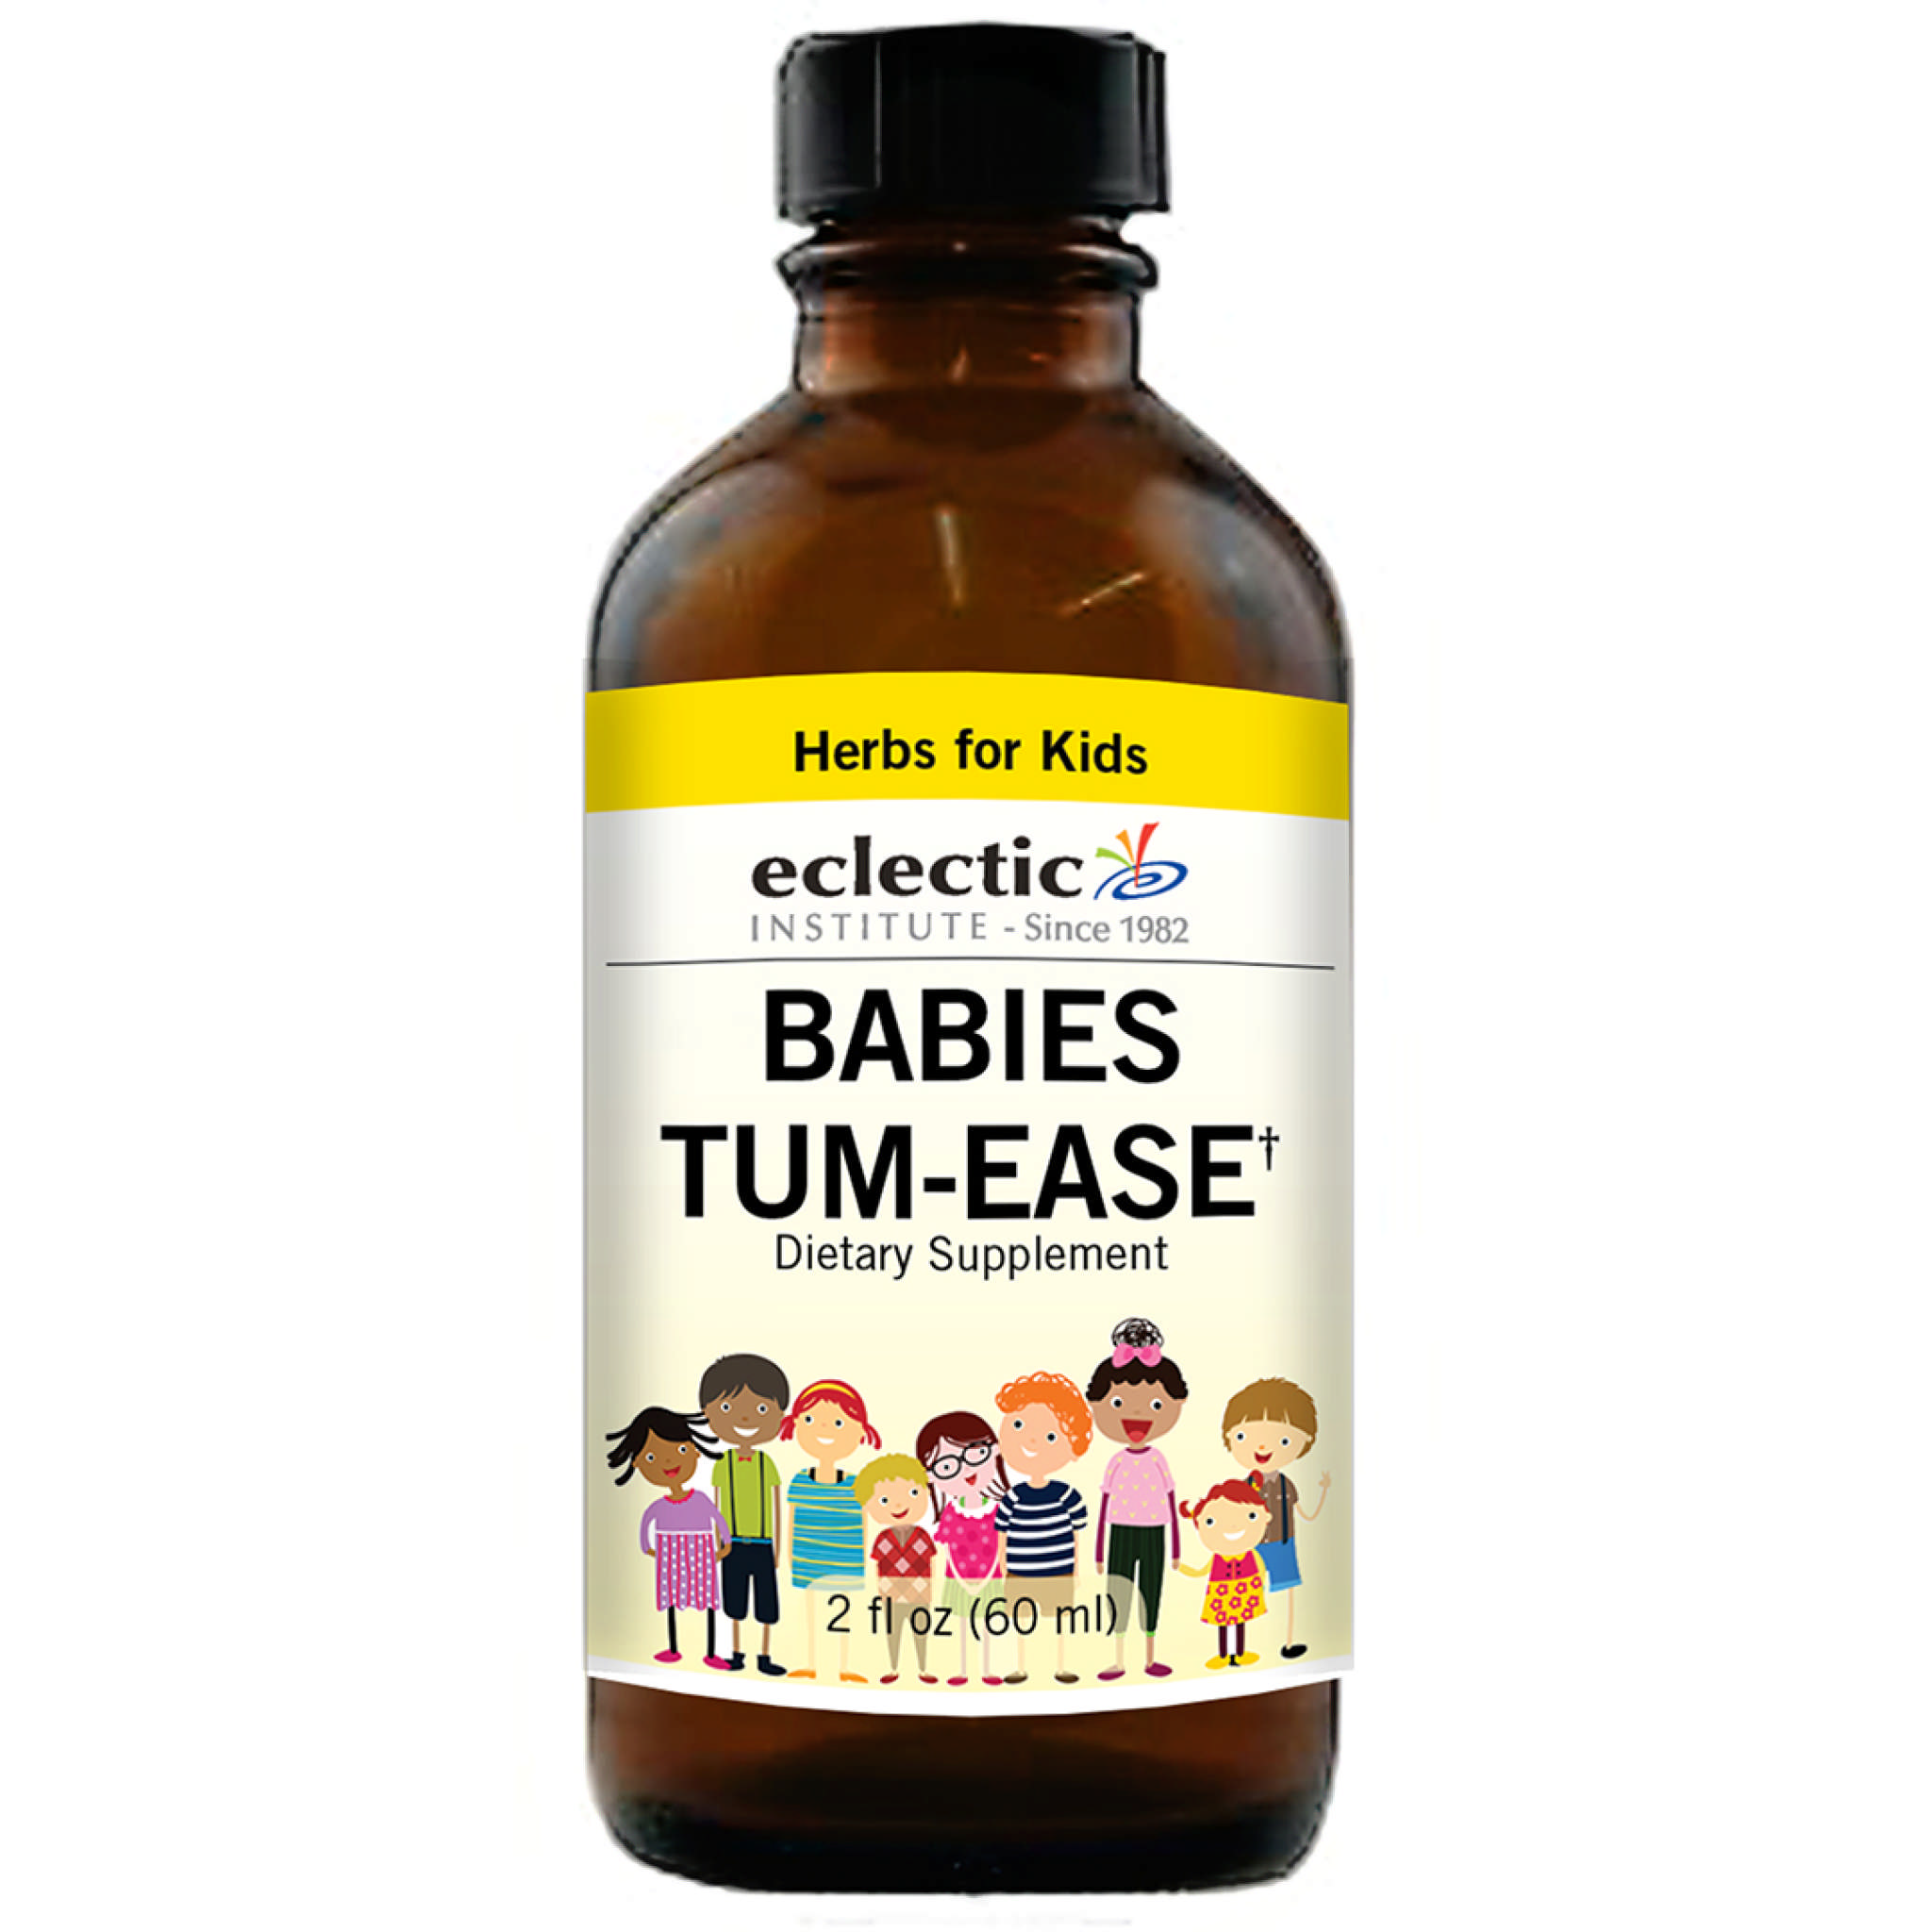 Eclectic Institute - Babies Tum Ease A/F